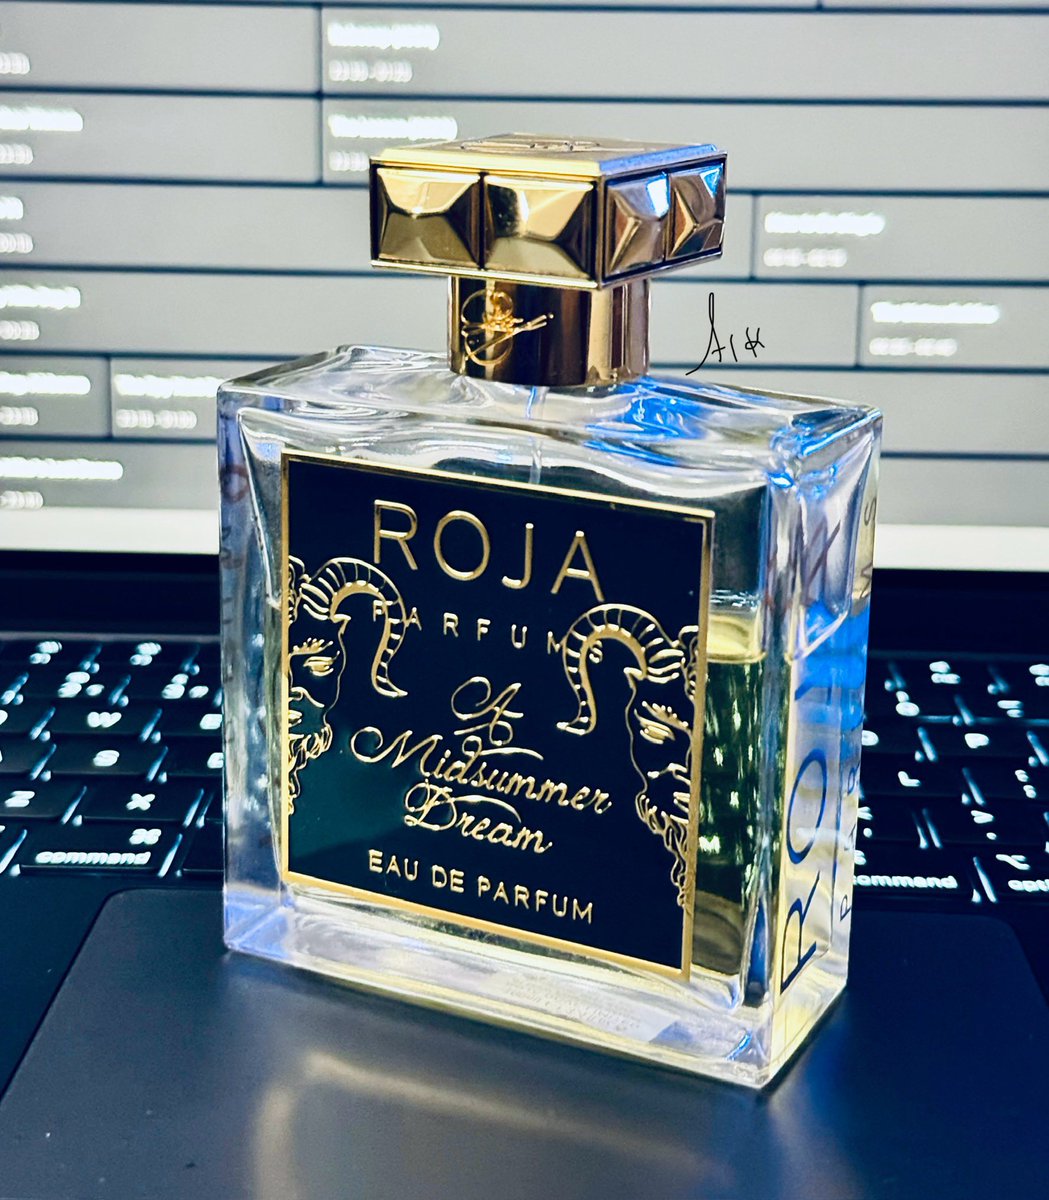 #SOTD #SOTN #fragrance #FragHead #fraghead #parfumcollection #smellgood #perfumlover 
#Fragzspace #Perfume #nicheperfumes #perfumeaddict #scentoftheday #perfumes #perfumecollection #FragzSpace #rojaparfums 

One of my first Rojas, enchanting goodness!